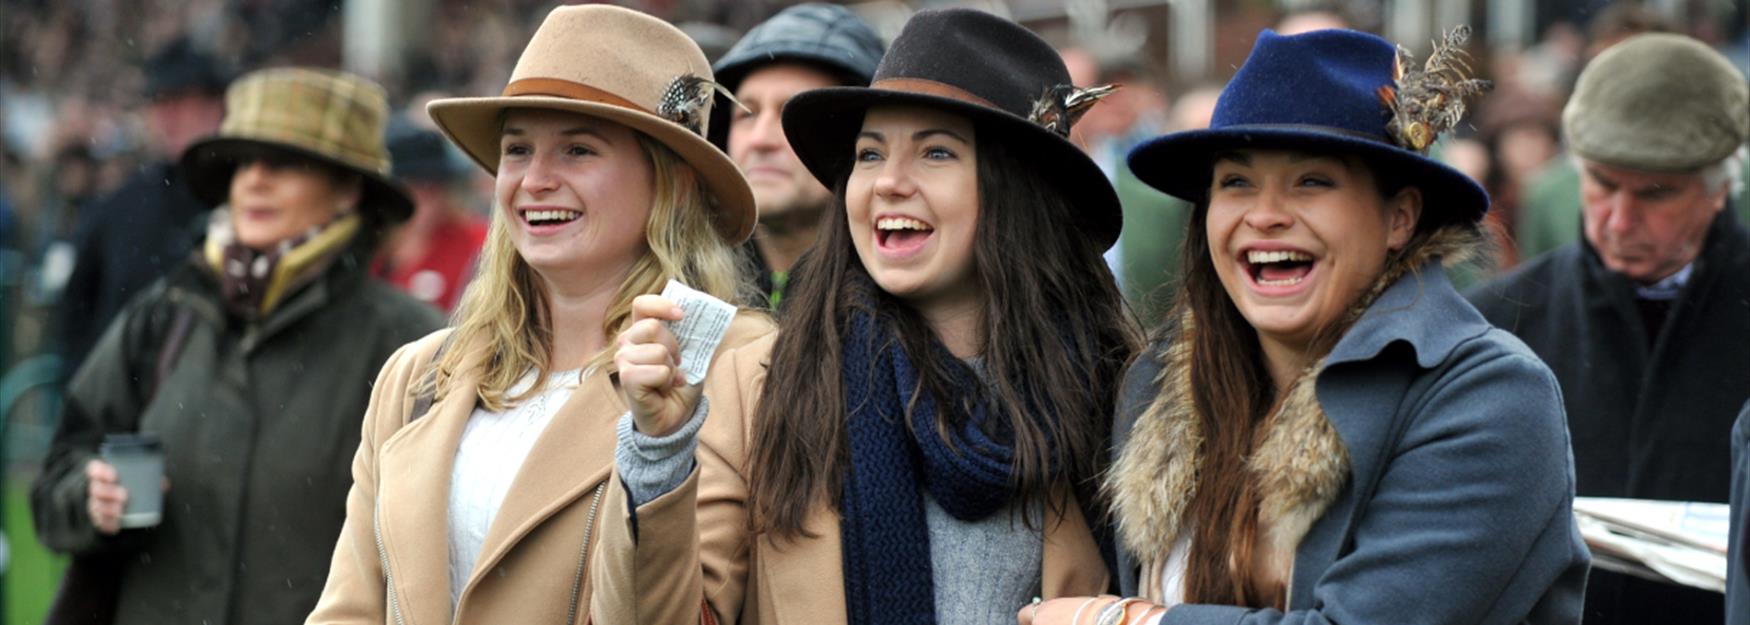 3 excited ladies at a Cheltenham Race meet